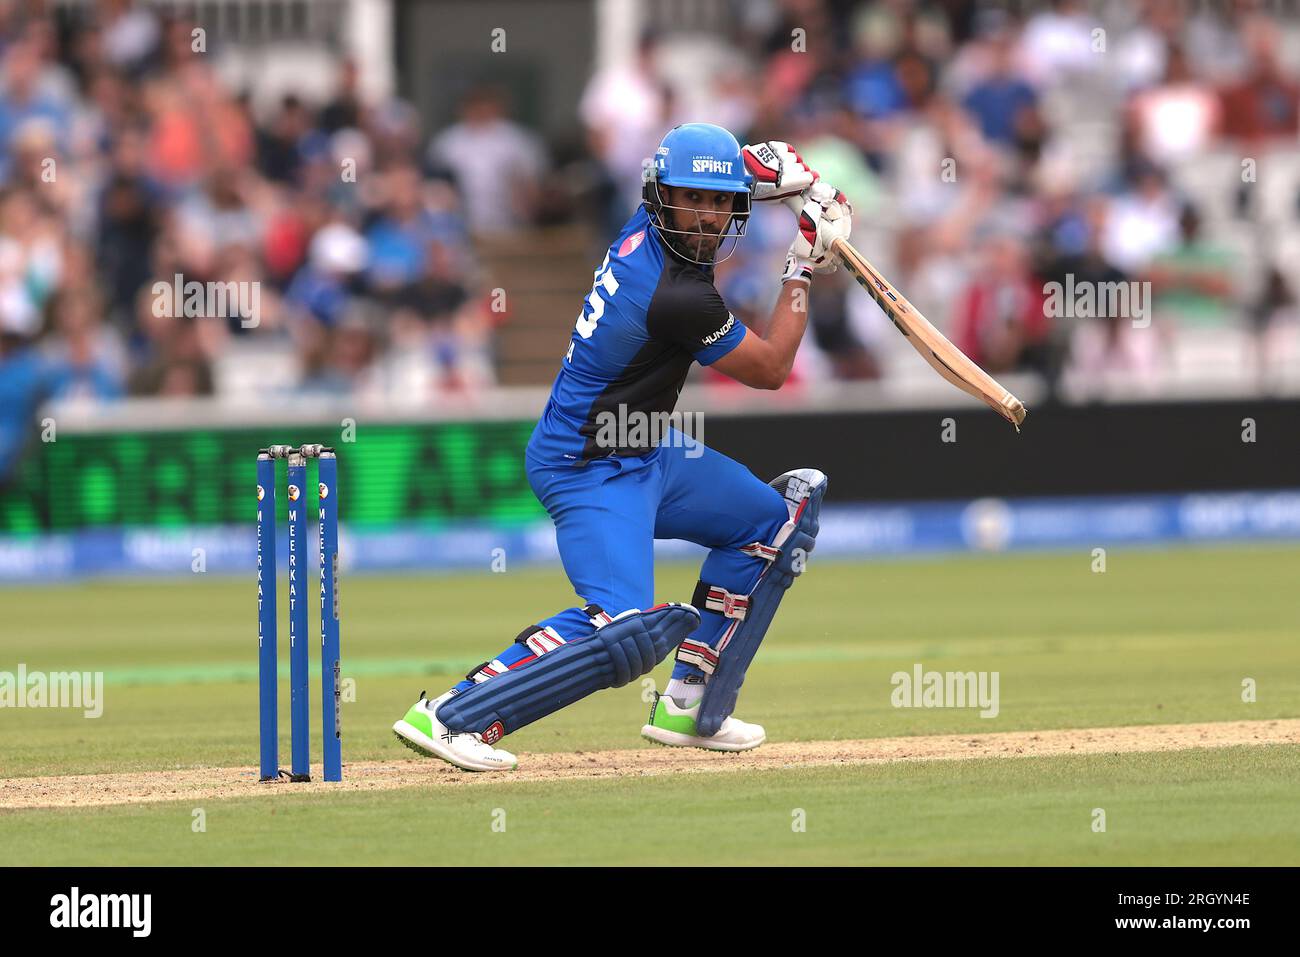 London, UK. 12th Aug, 2023. London Spirit's Ravi BoparaBatting as the London Spirit take on the Trent Rockets in The Hundred men's competition at Lords. Credit: David Rowe/Alamy Live News Stock Photo